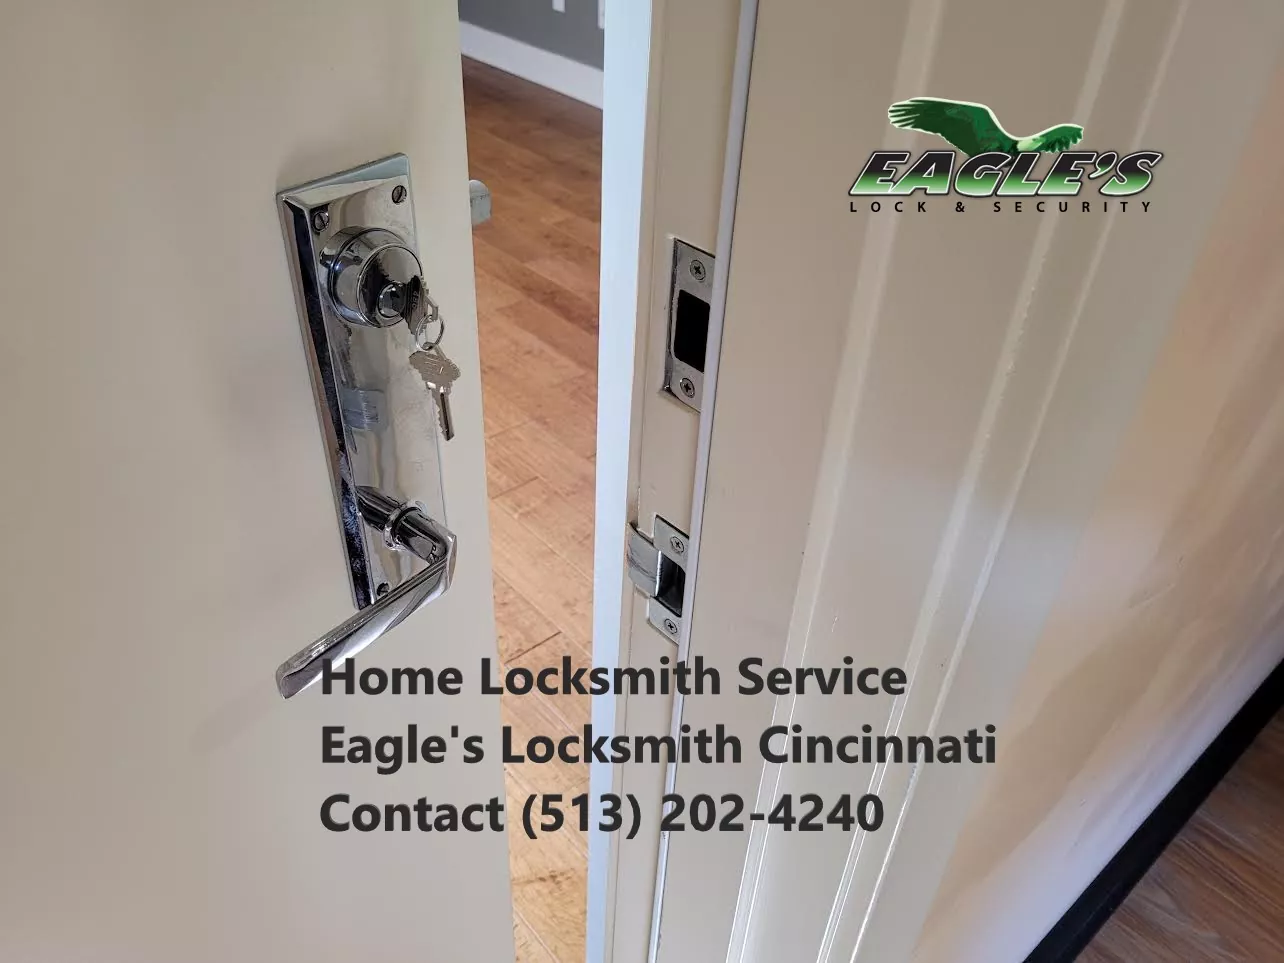 Home Locksmith in Indian Hill Ohio